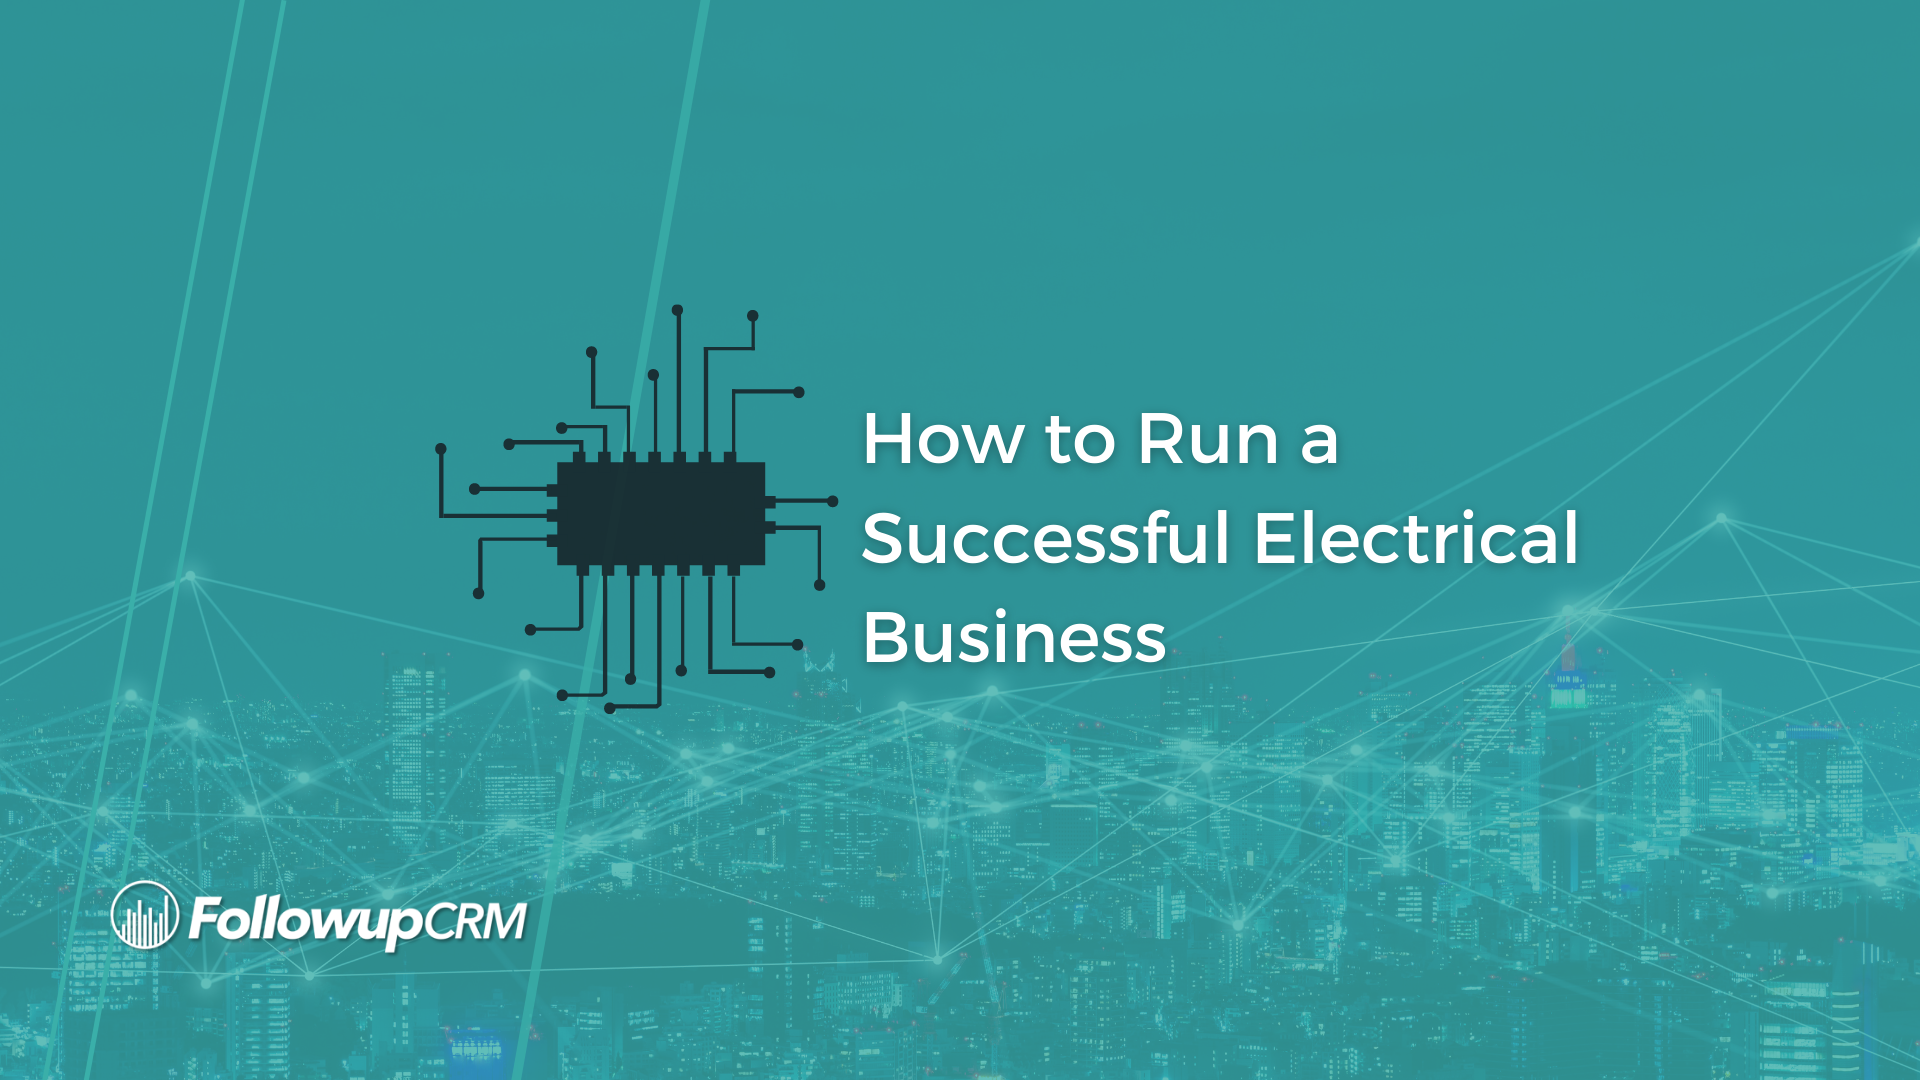 How to Run a Successful Electrical Business